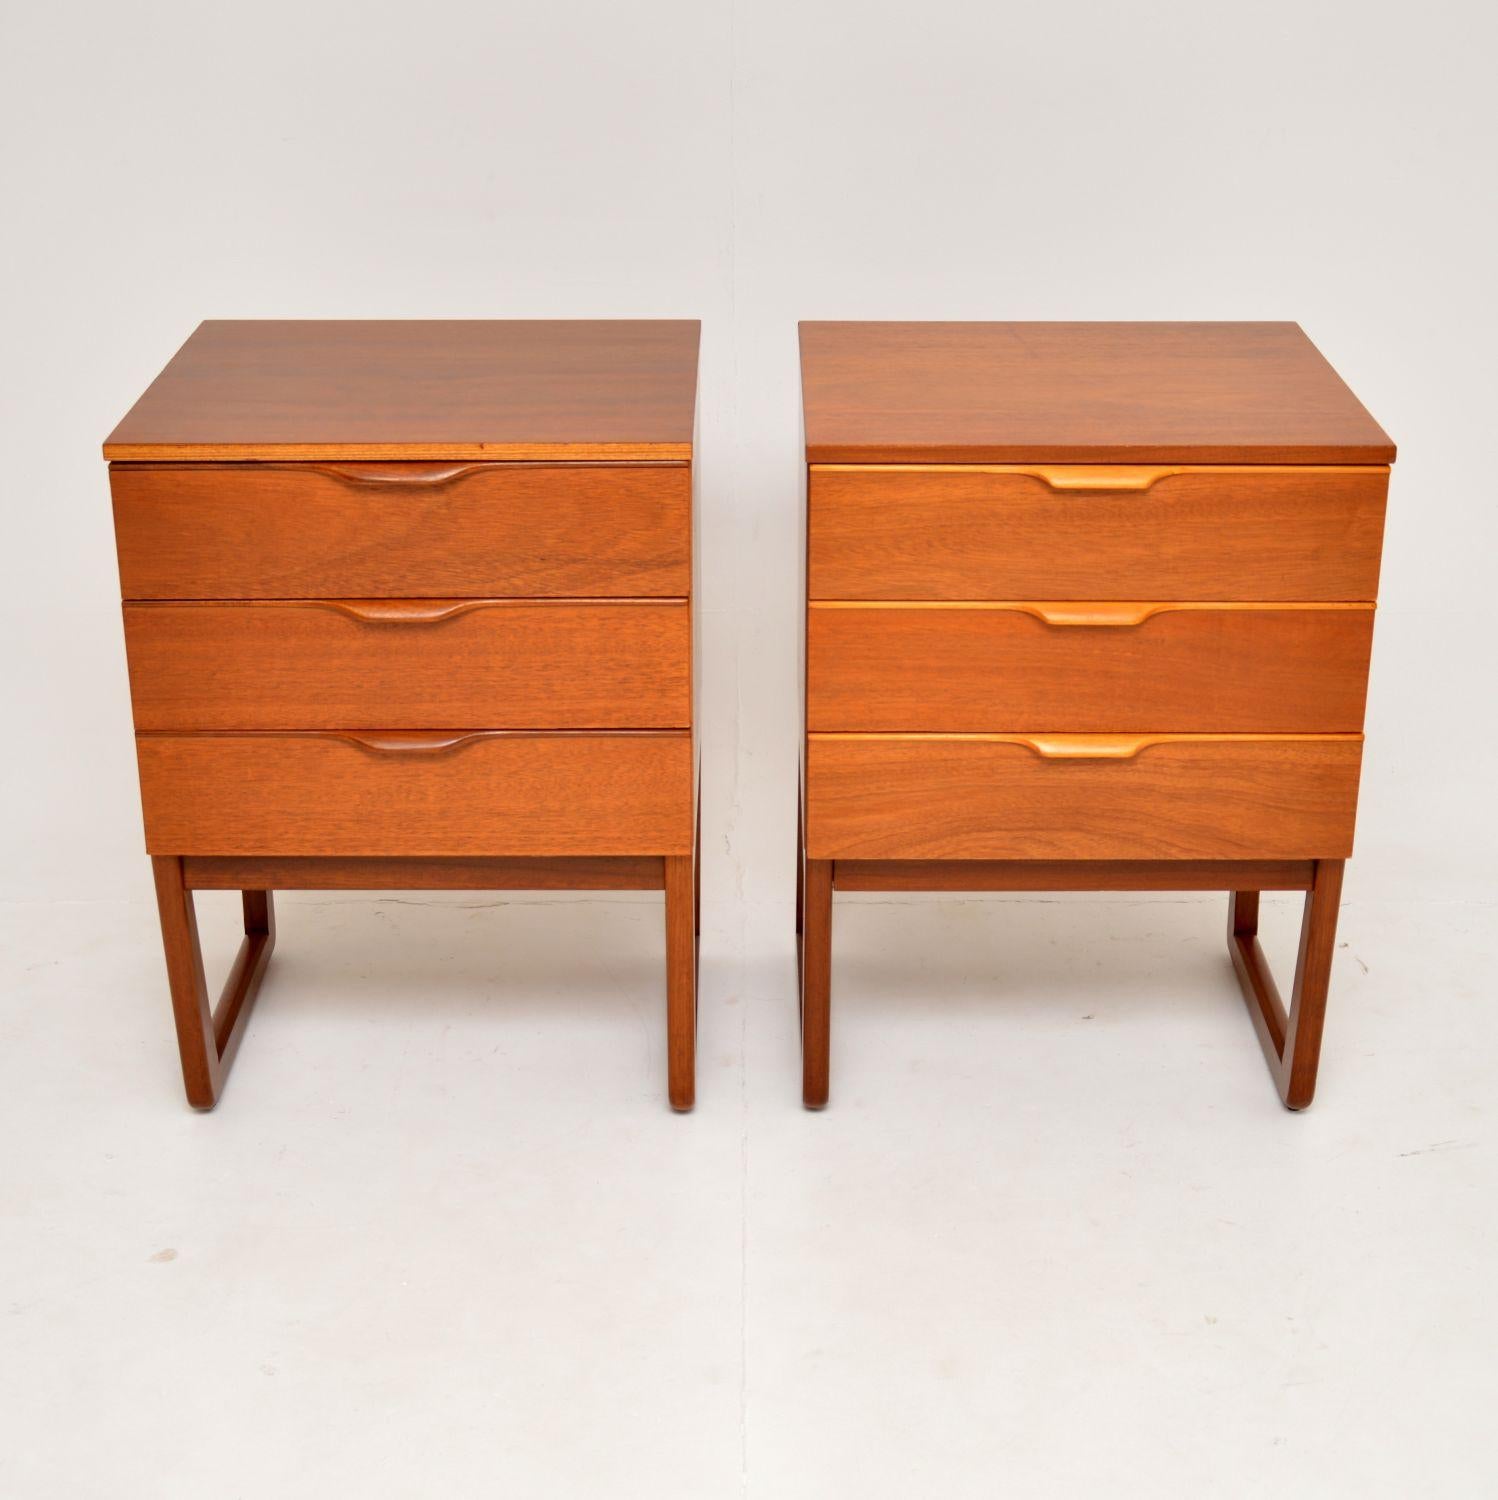 A stylish and extremely well made pair of vintage bedside chests of drawers. They were made in England, and date from around the 1960’s.

They are a great size with lots of storage space, and are nicely finished on the backs as well, so can be